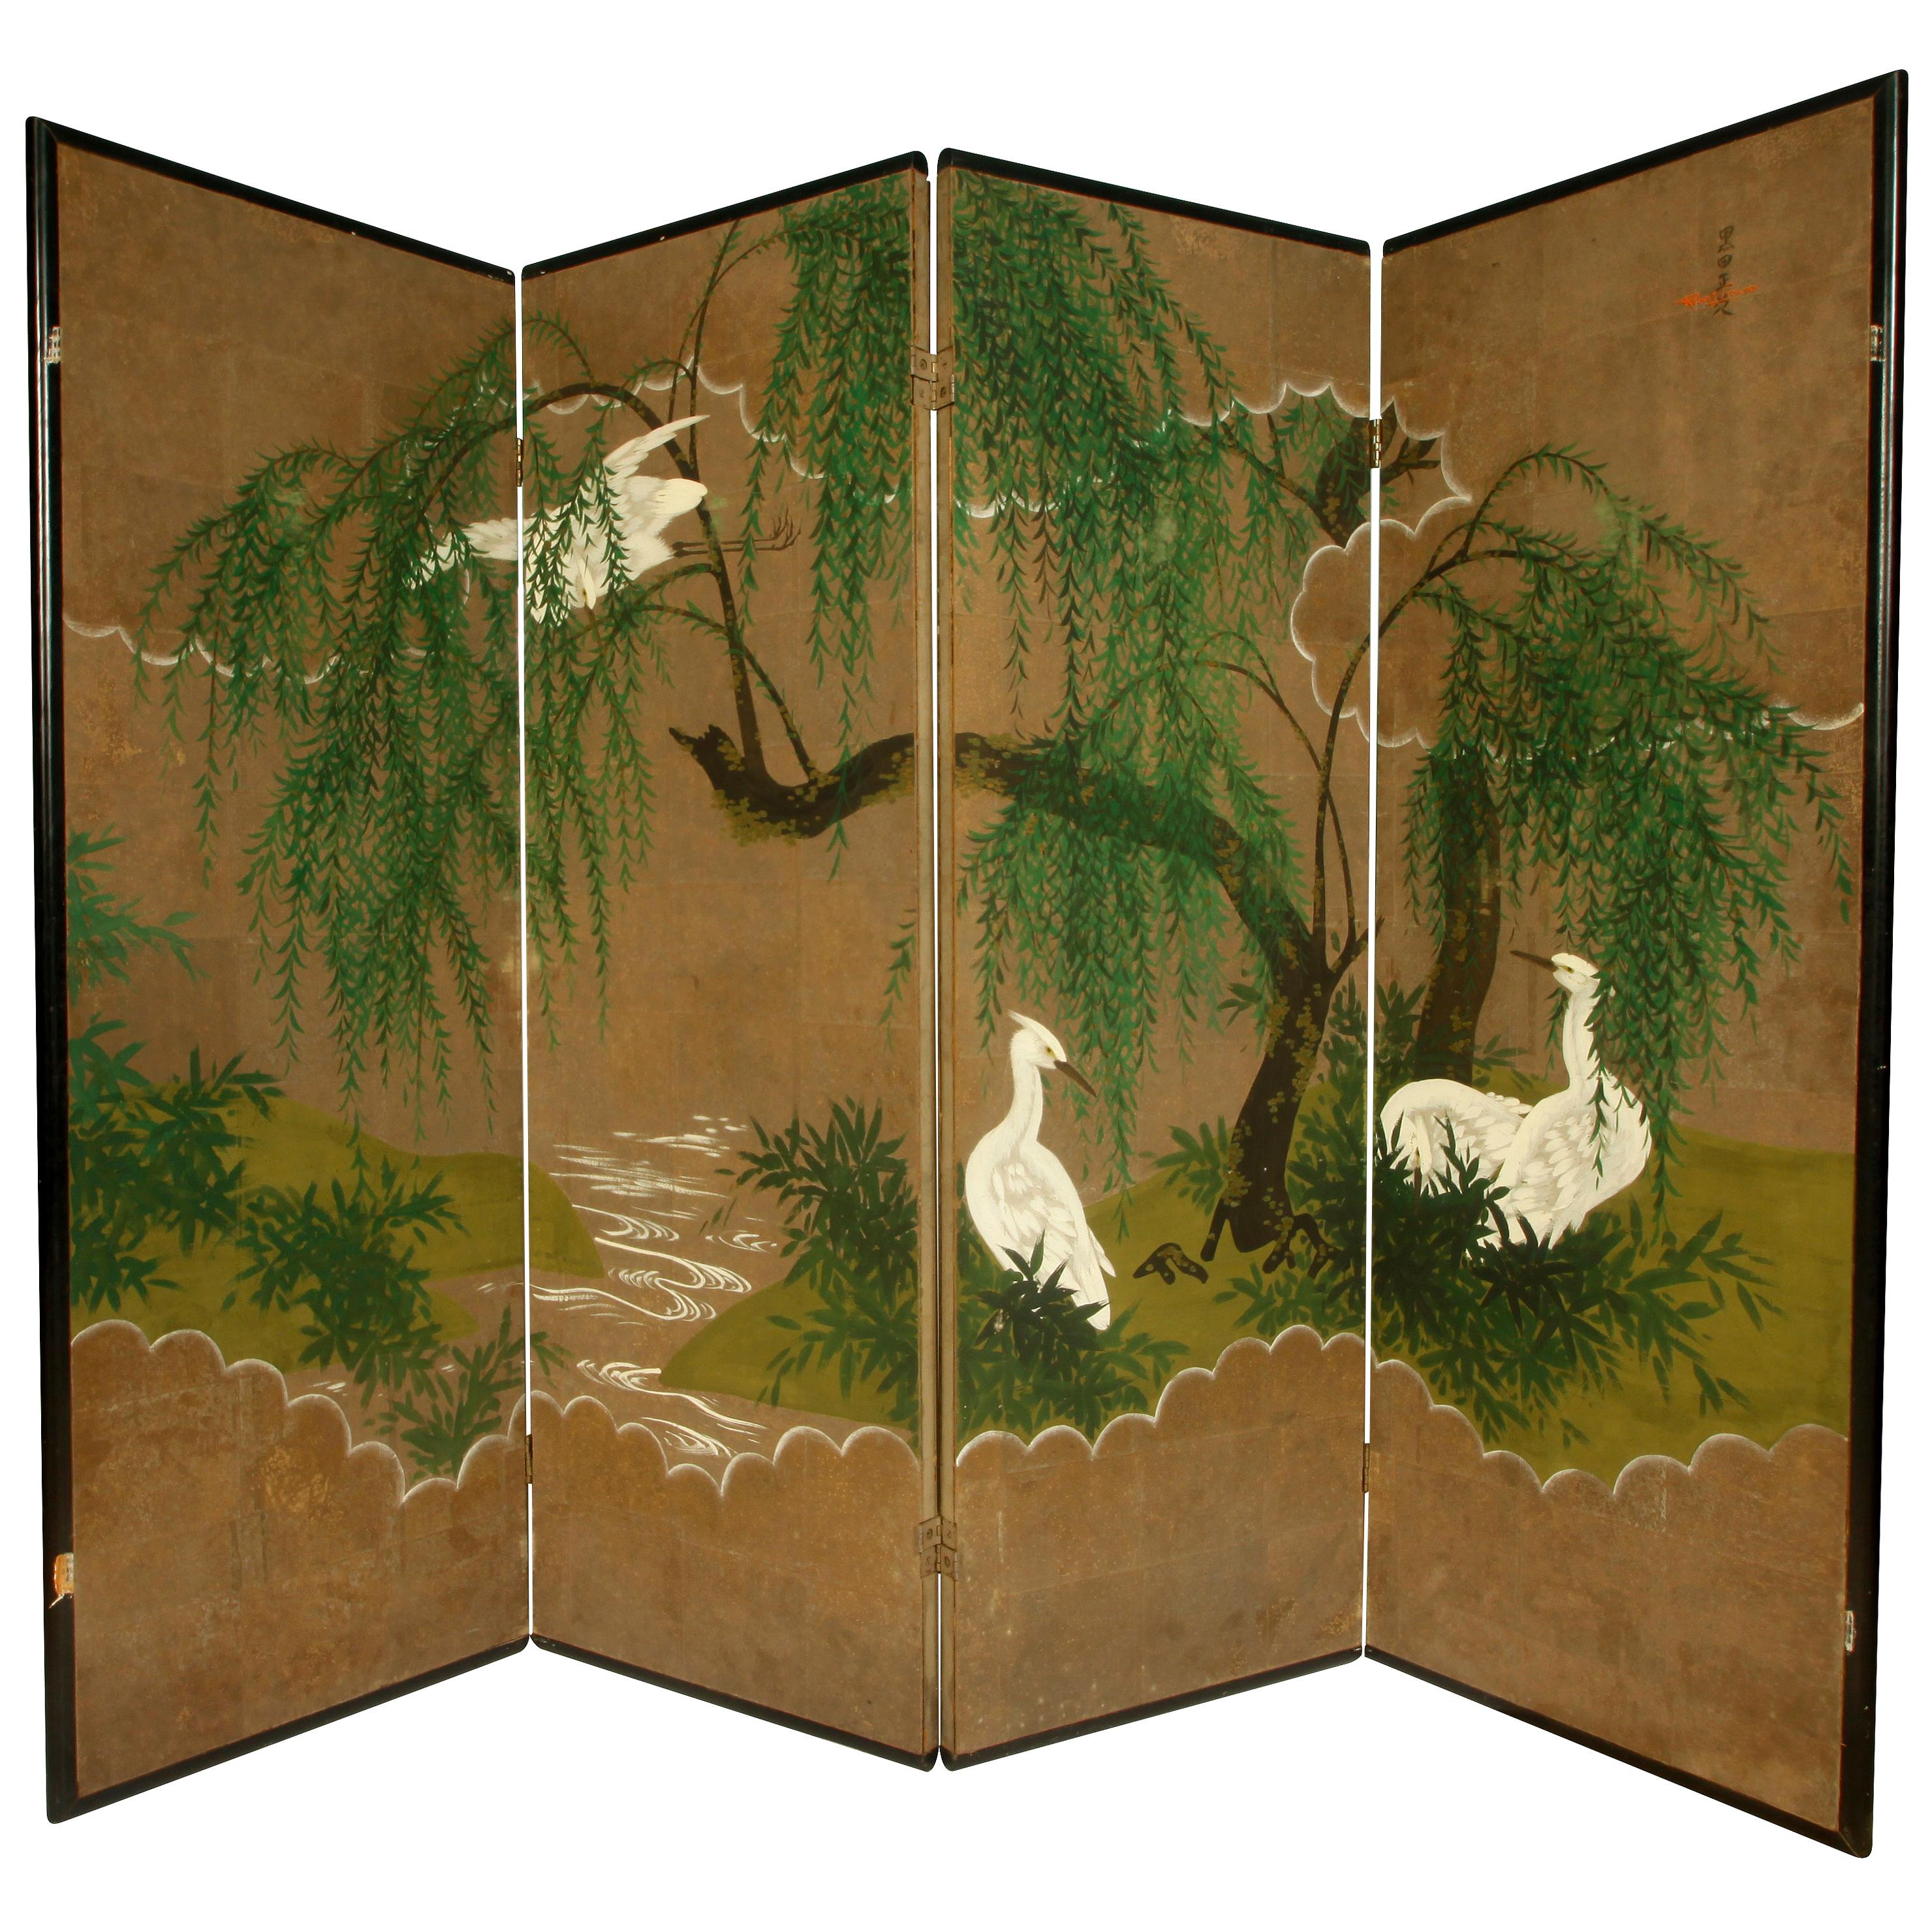 Robert Crowder "Weeping Willows and Herons" Hand Painted Screen